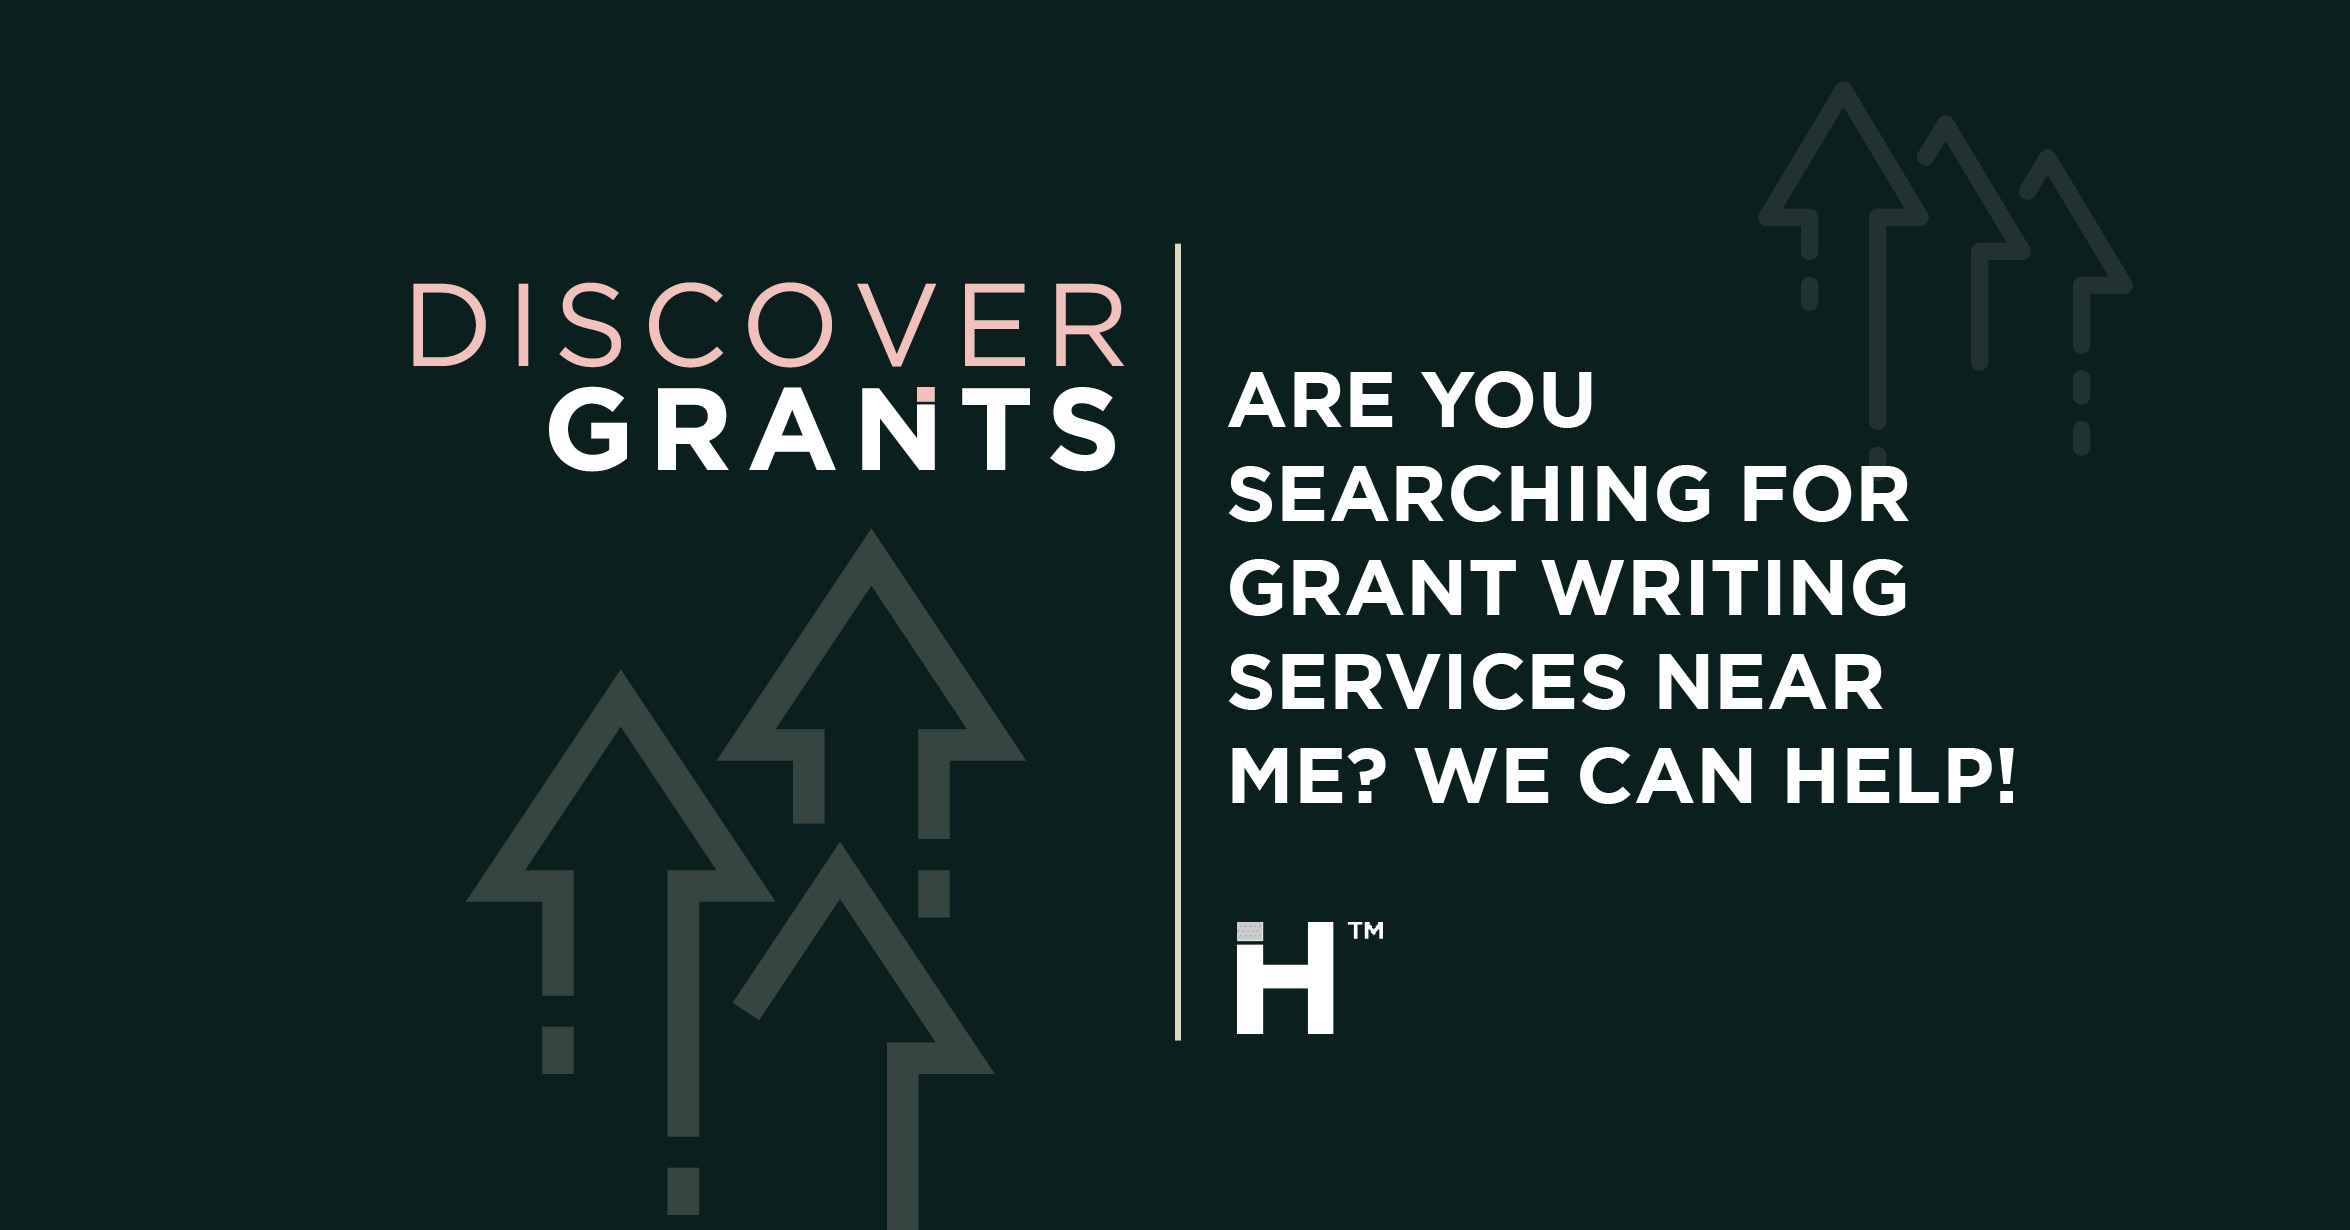 ‘Grant Writing Services Near Me’ – Does Location Matter?